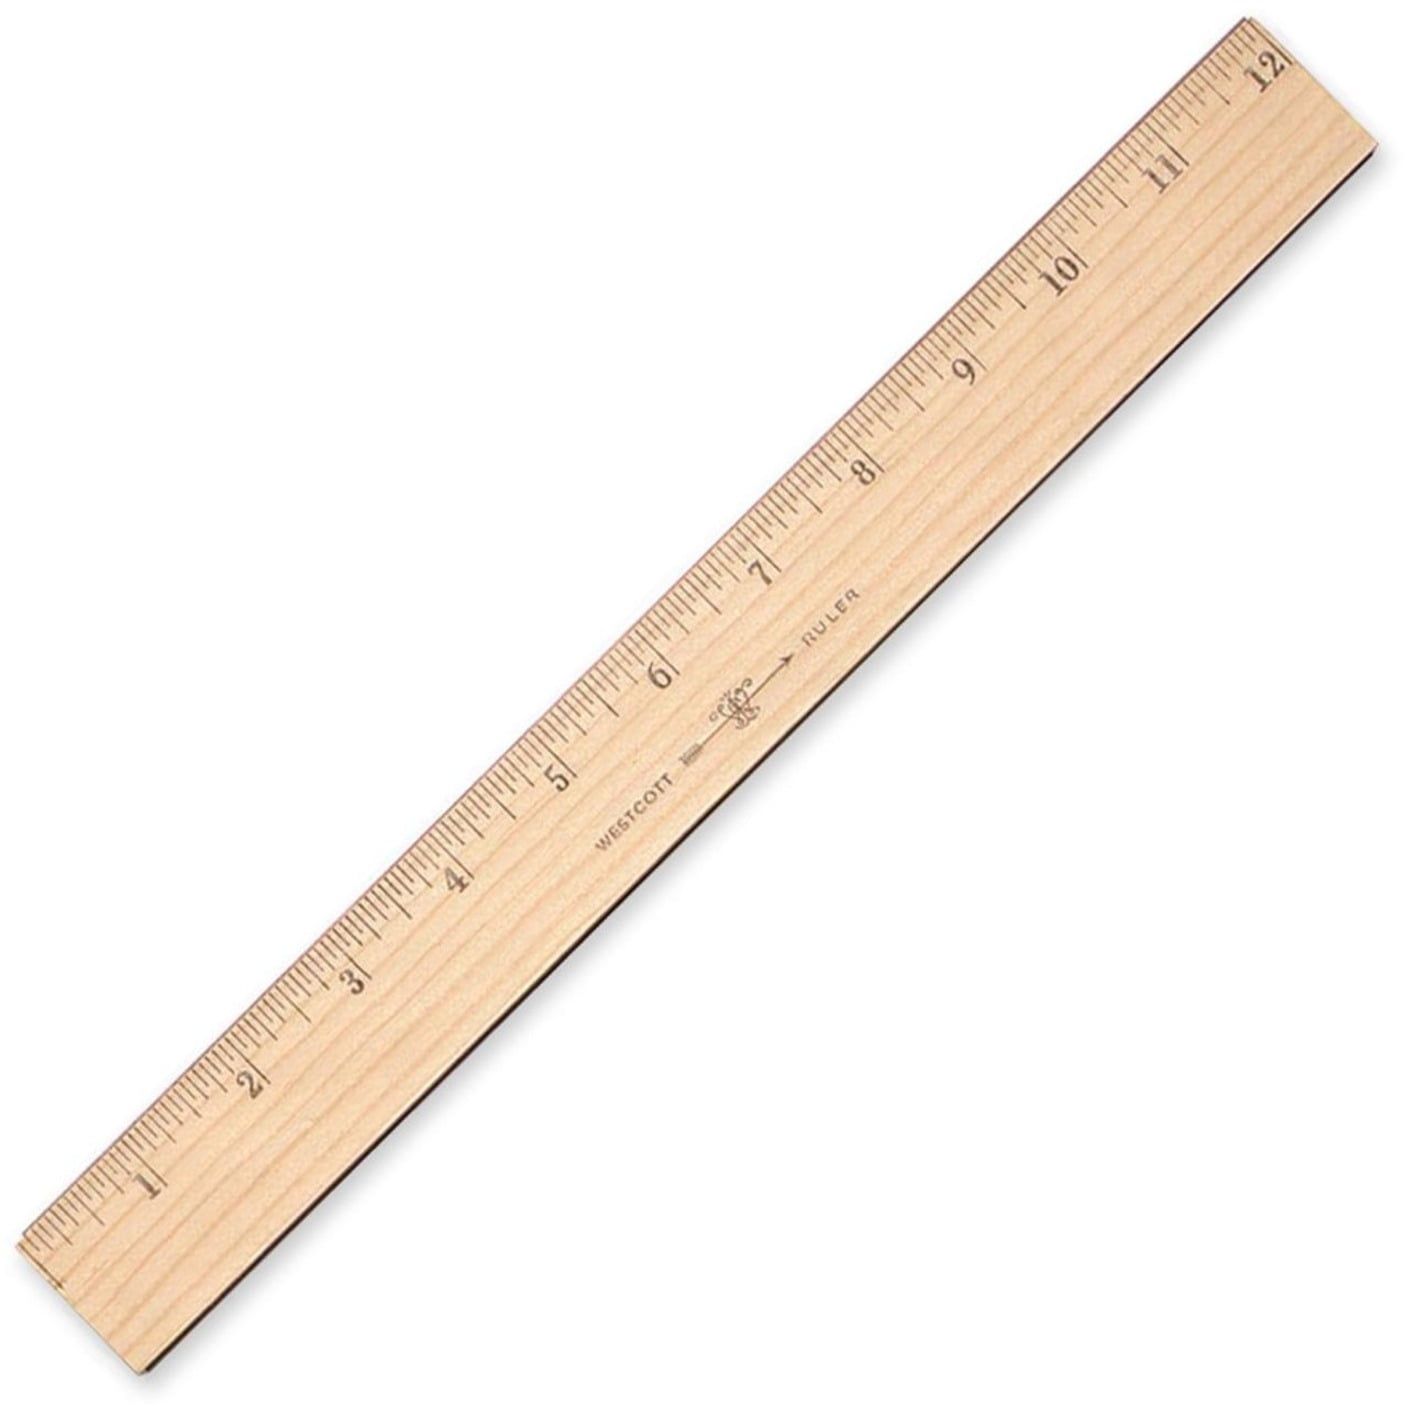  Westcott Stainless Steel Office Ruler with Non Slip Cork Base,  6-Inch (10414) : Office And School Rulers : Office Products